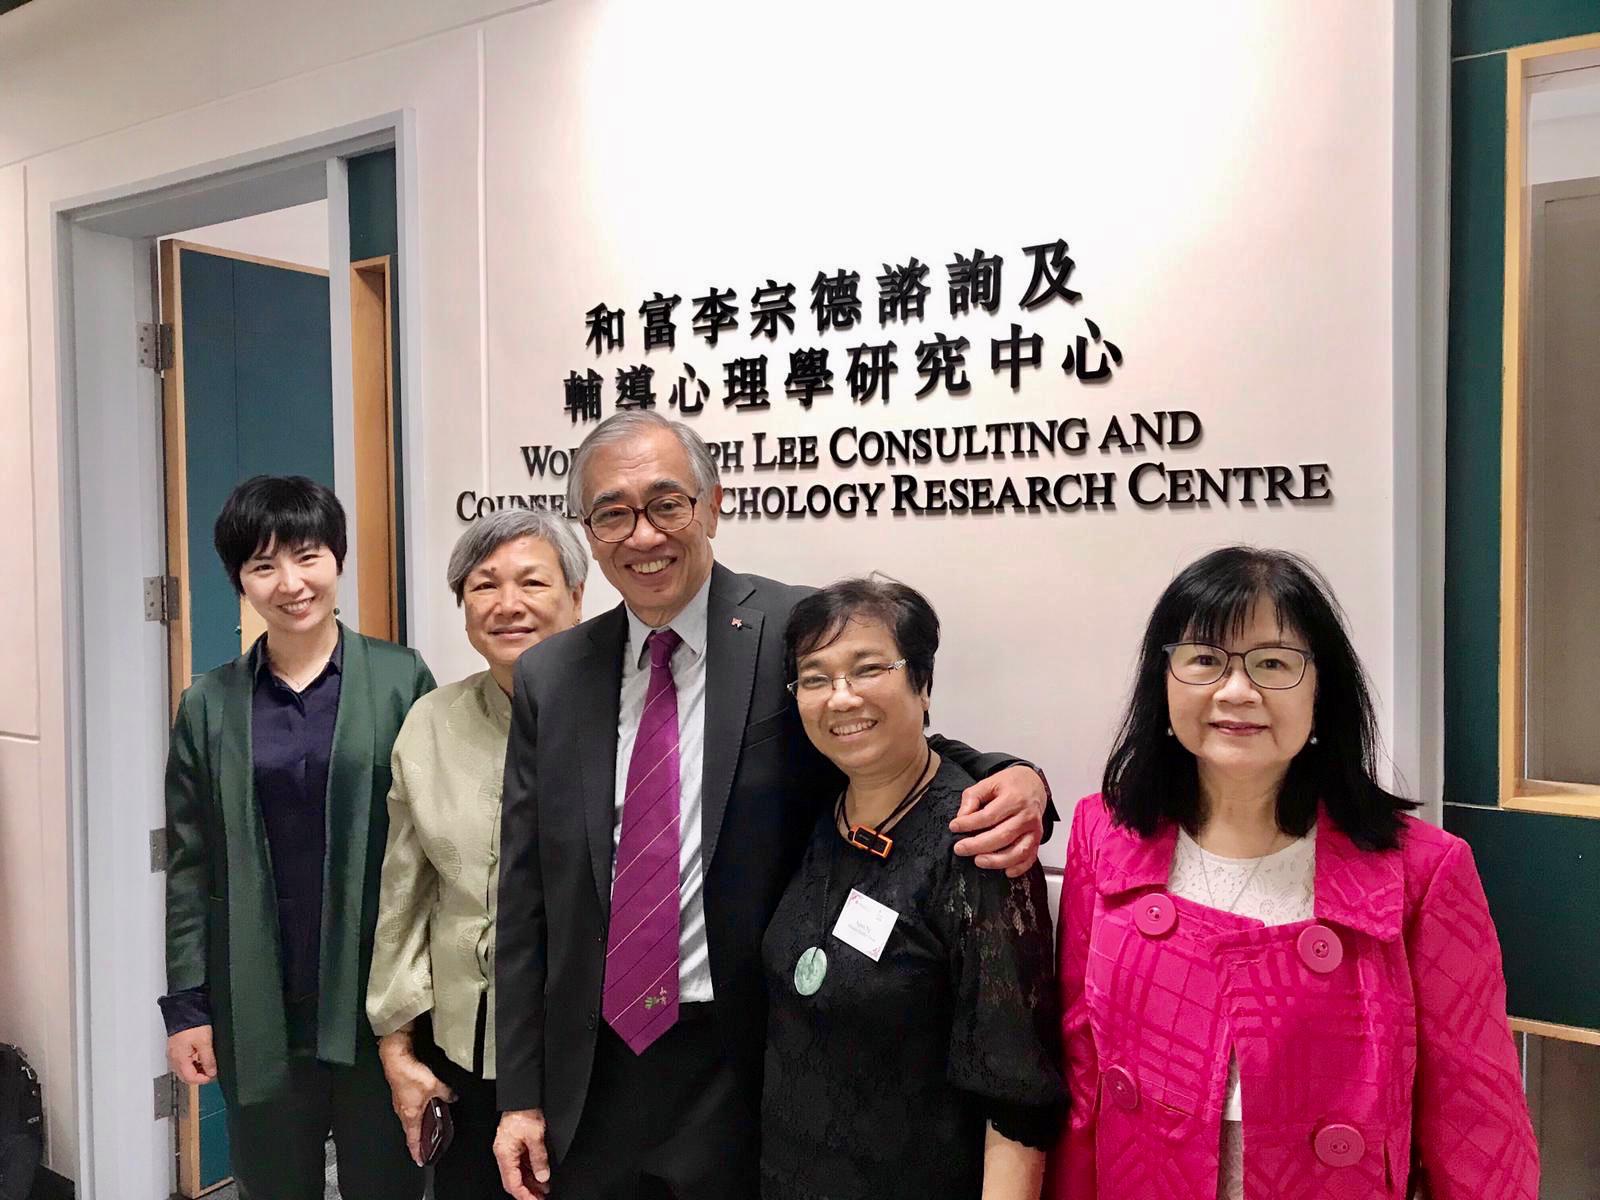 Dr. Joseph Lee and Mrs Lee visited our Centre